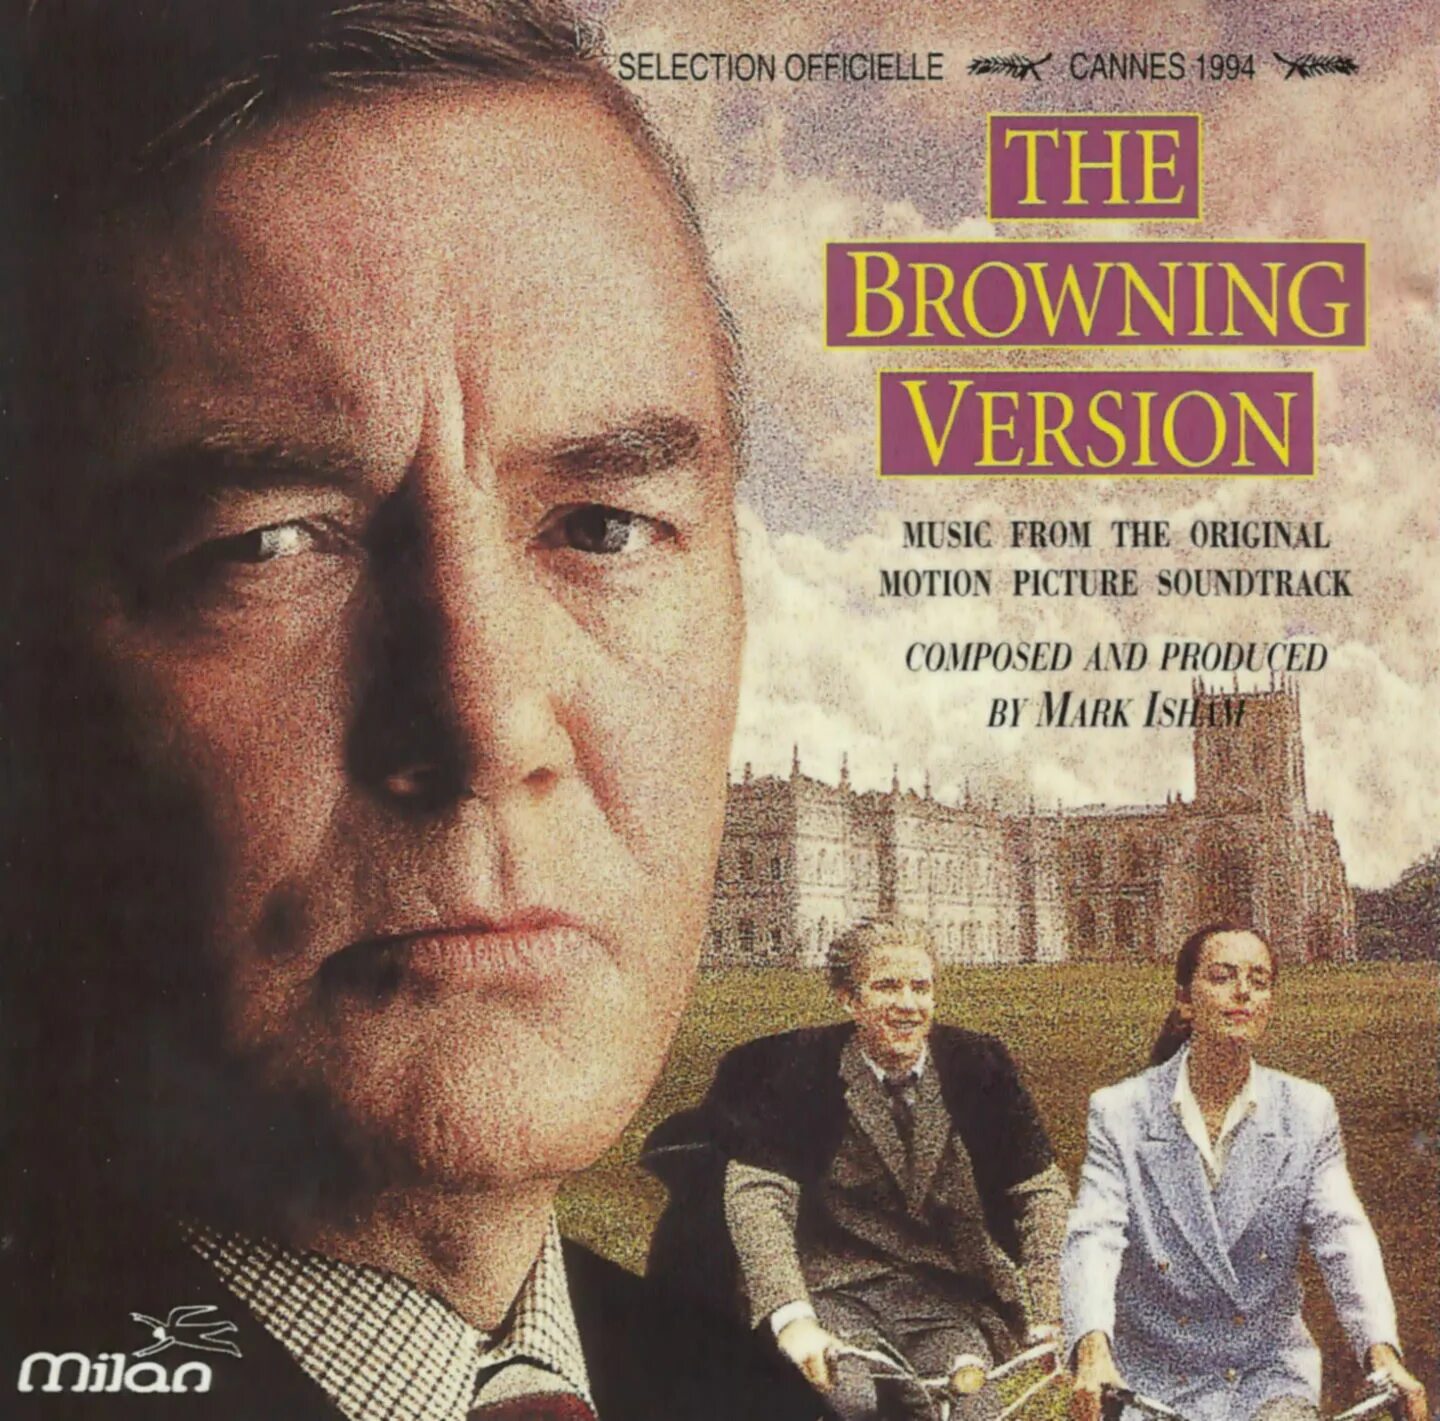 The browning time. The Browning albums. The Browning Geist. Greta Scacchi - the Browning Version 1994. Amateur 1994 Soundtrack.